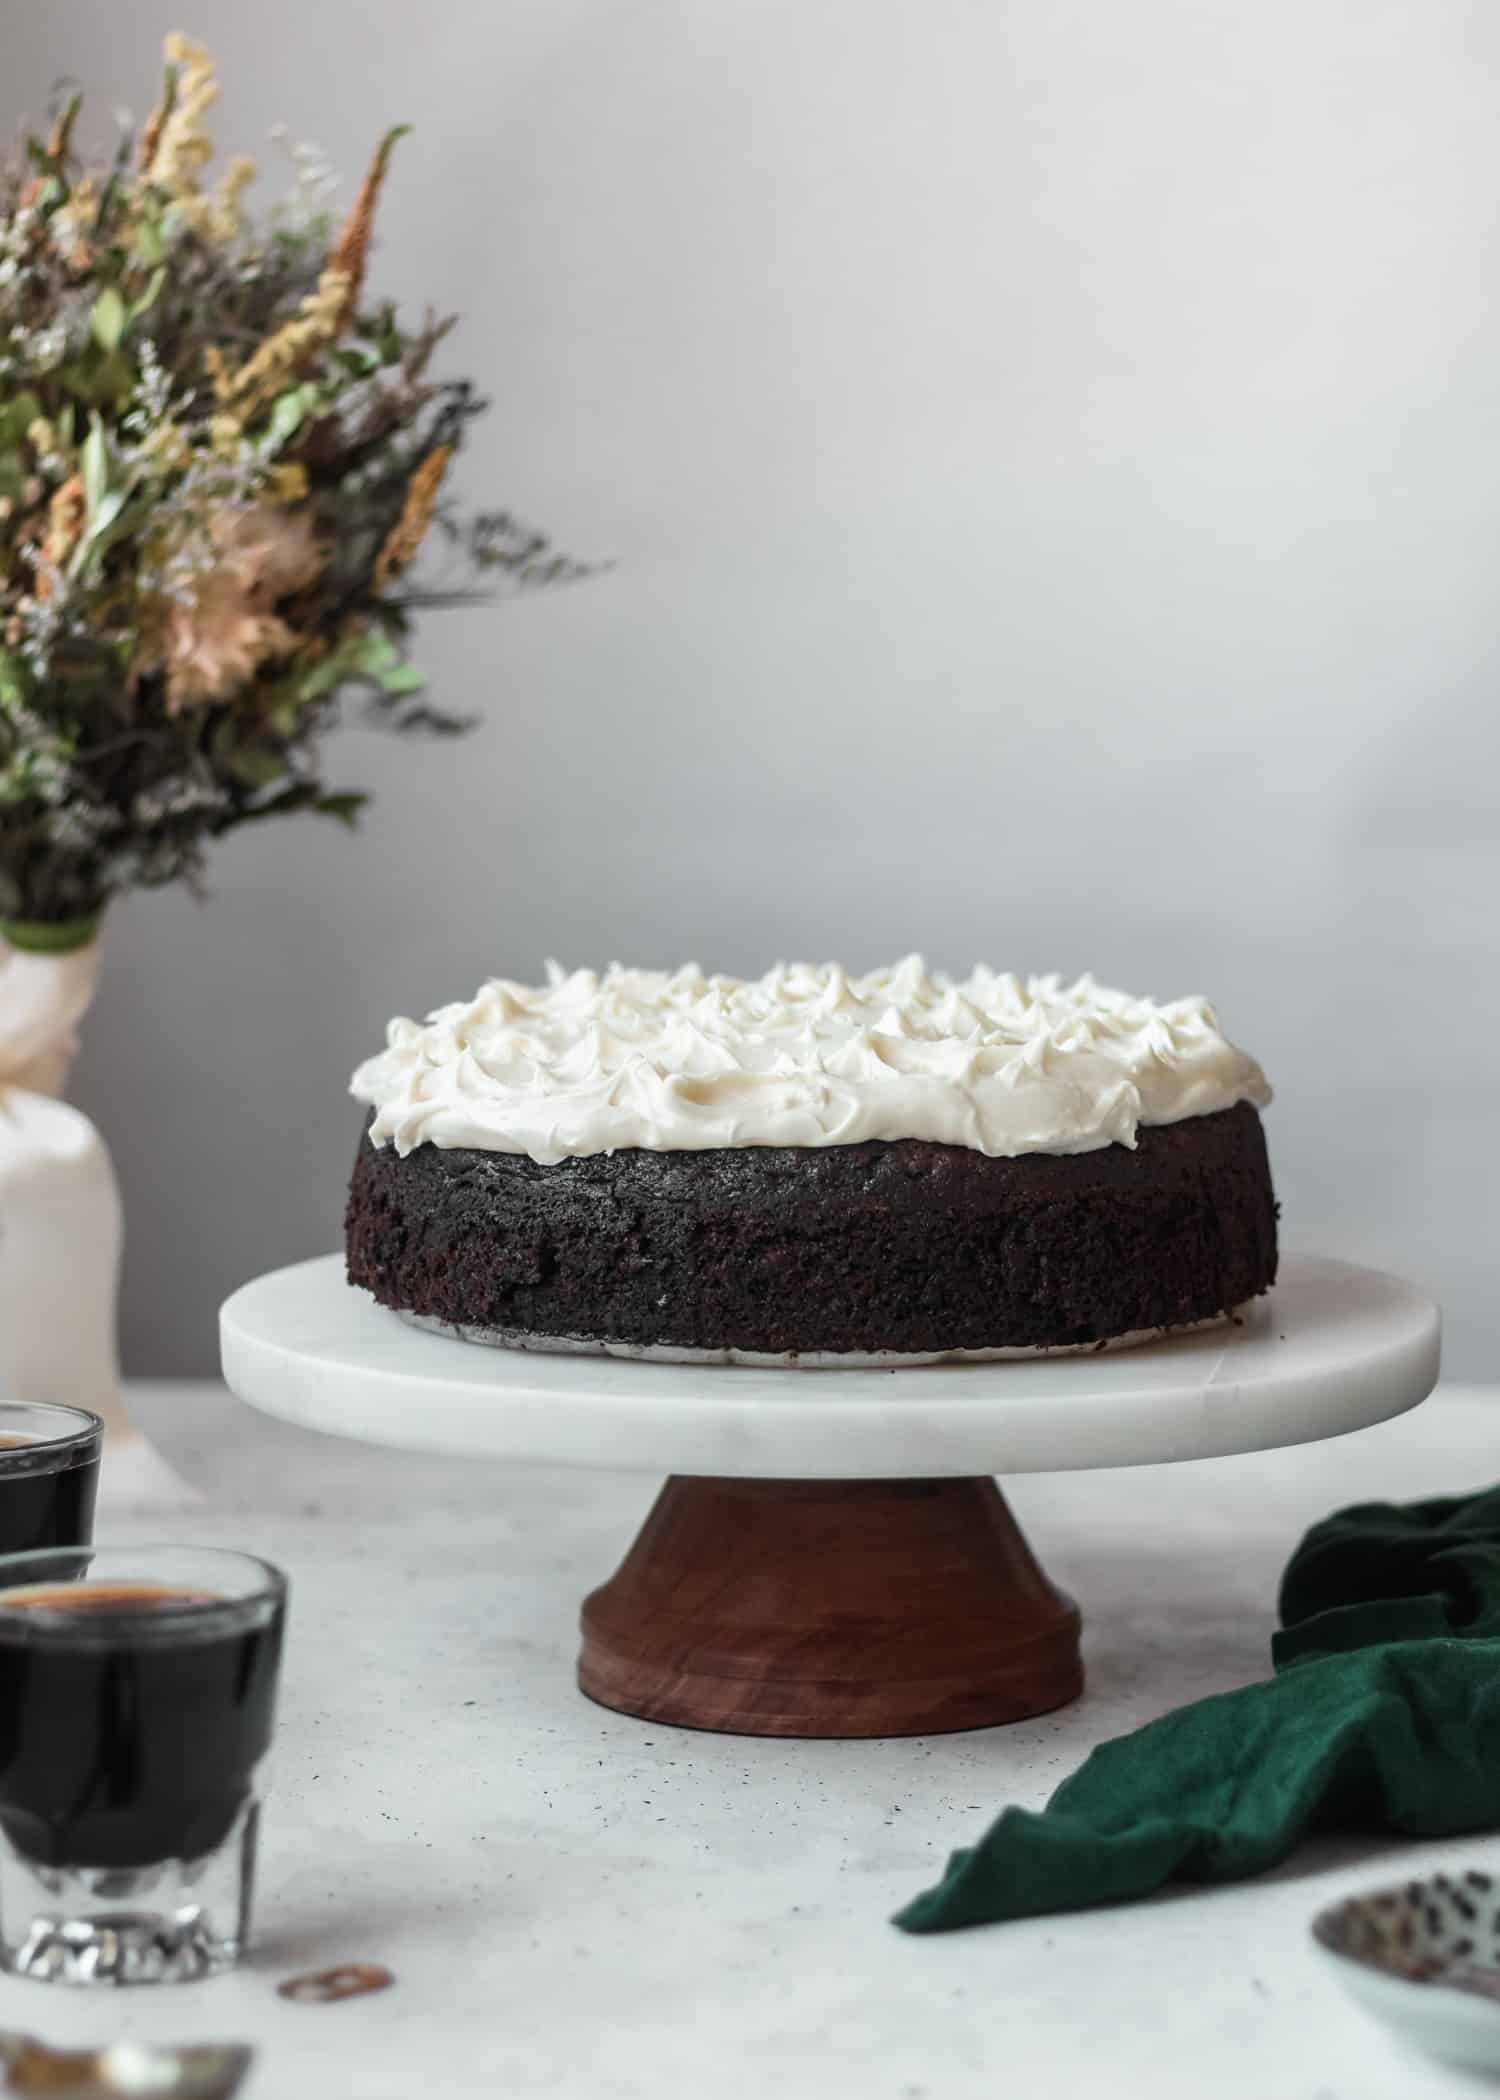 Recipes for Christmas cake: when is Stir-up Sunday in 2022? | The Week